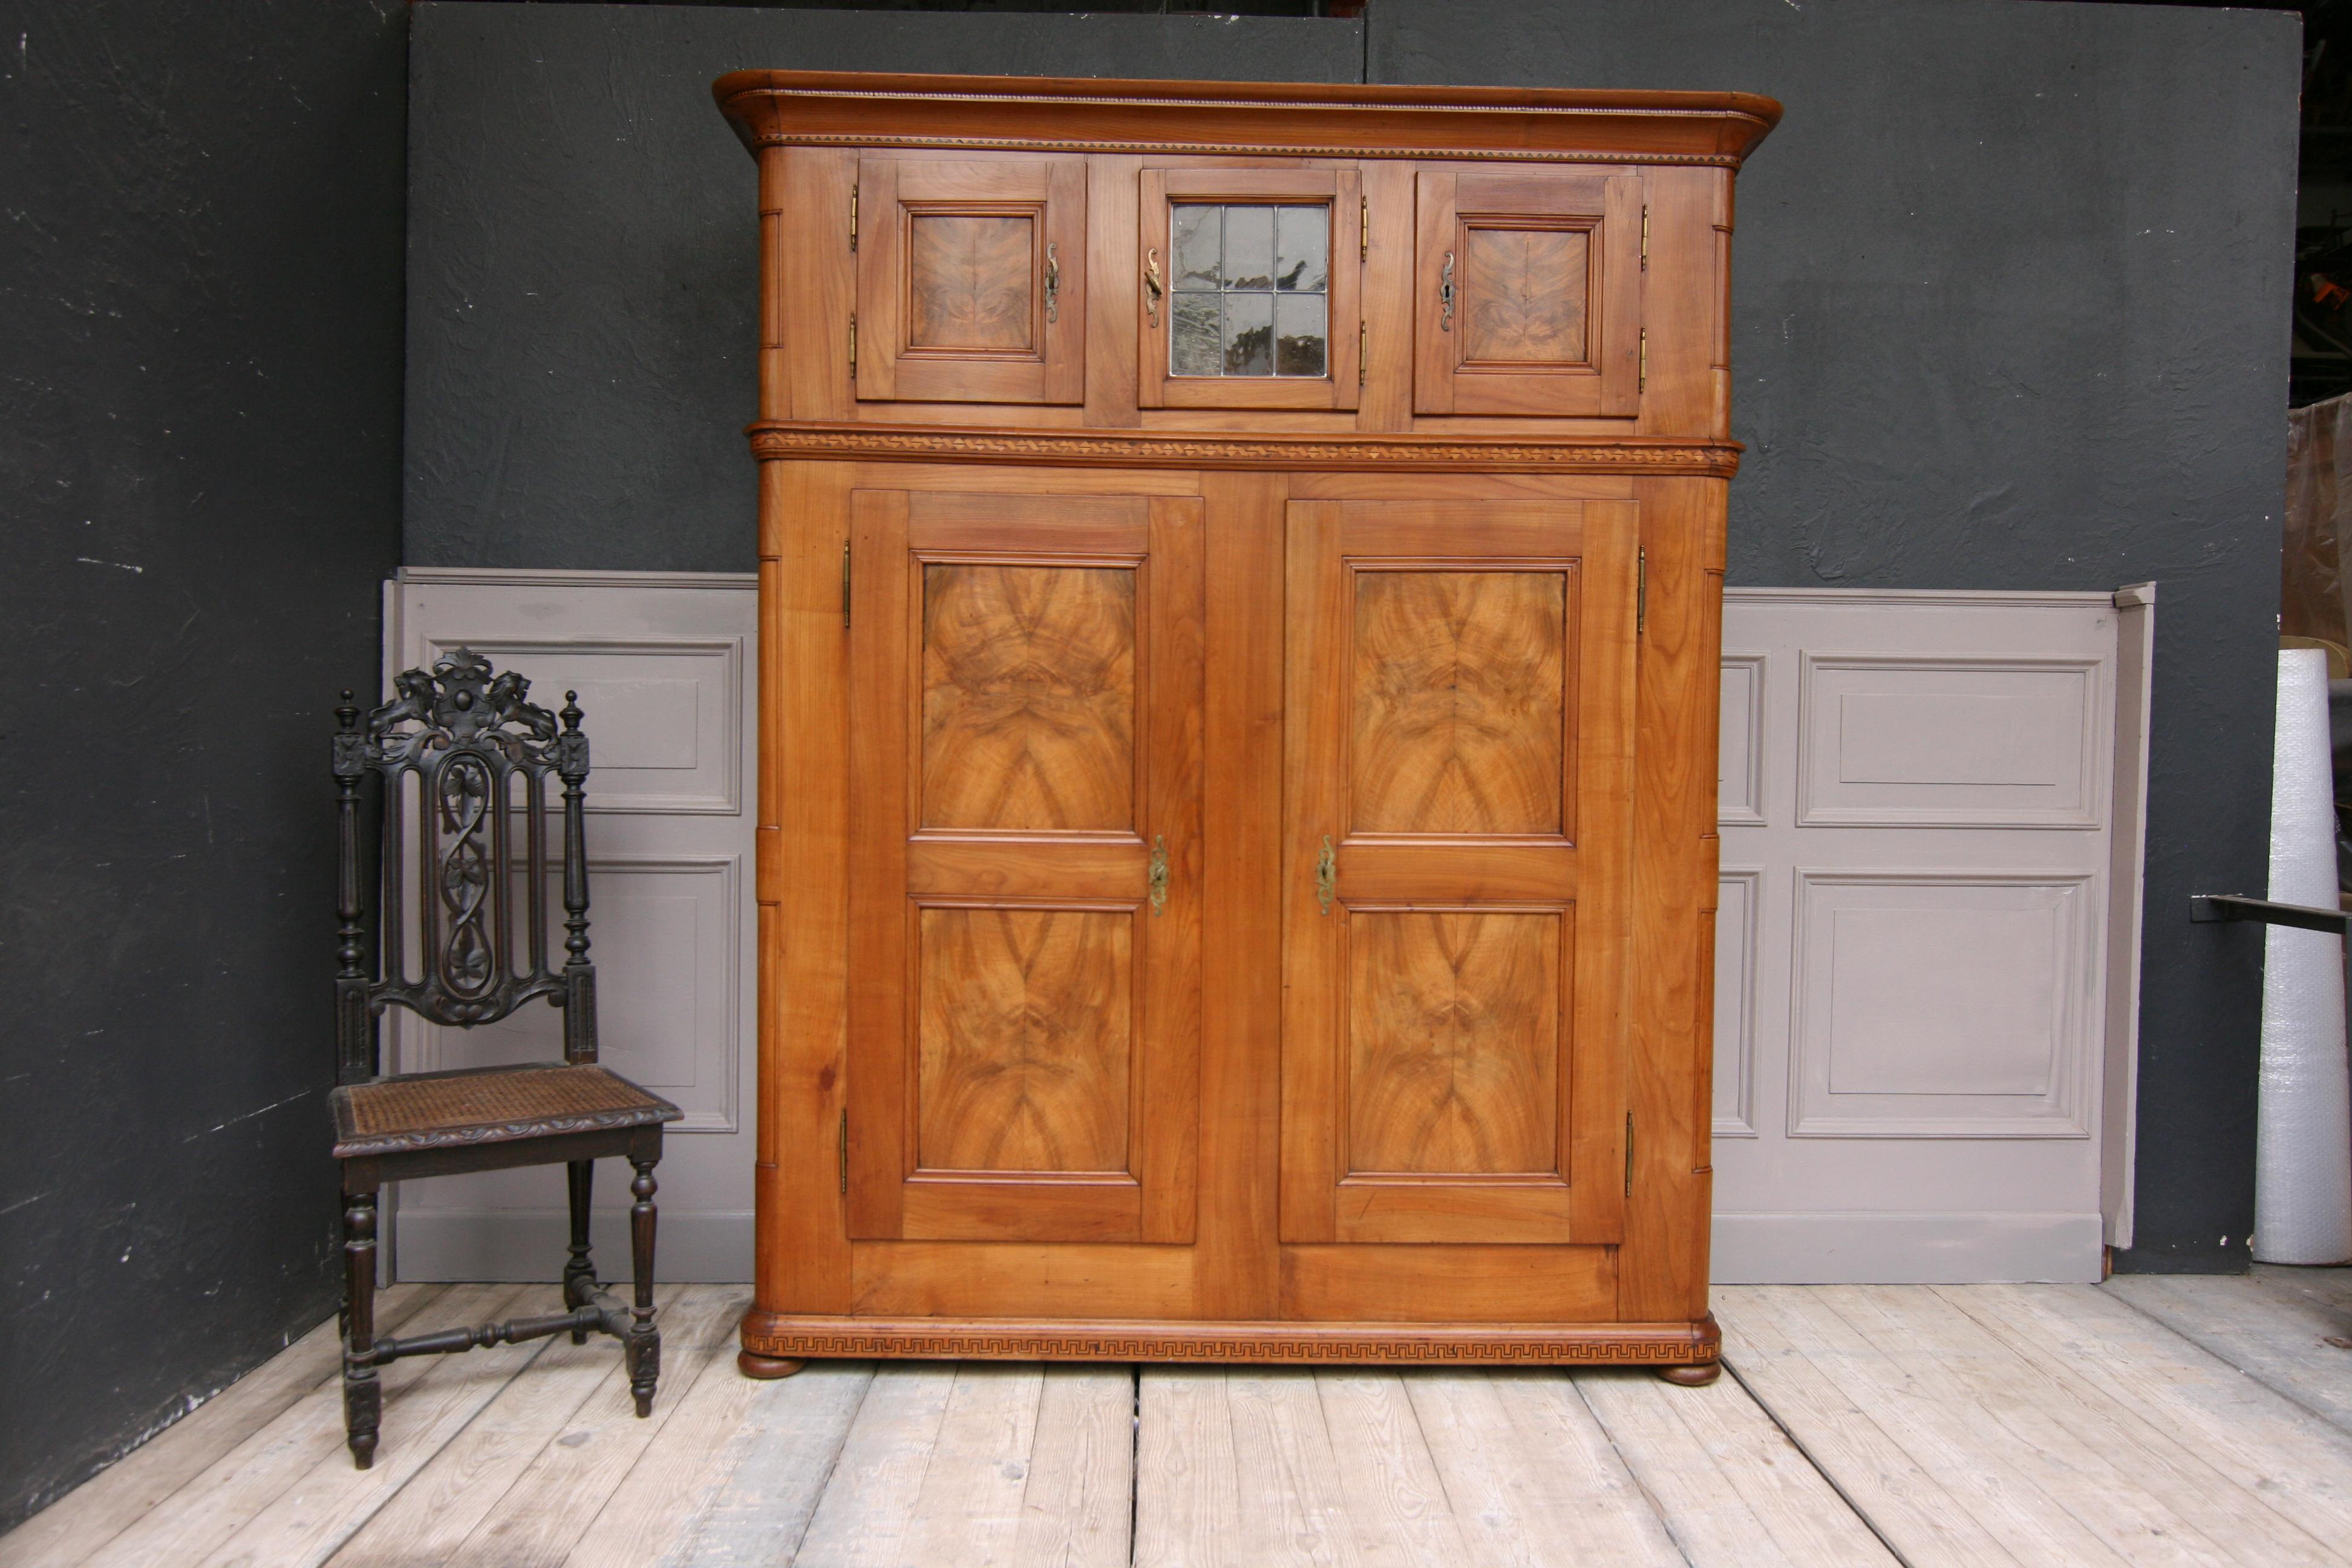 Biedermeier Early 19th Century Swiss Cupboard made of Cherry Wood with Marquetry